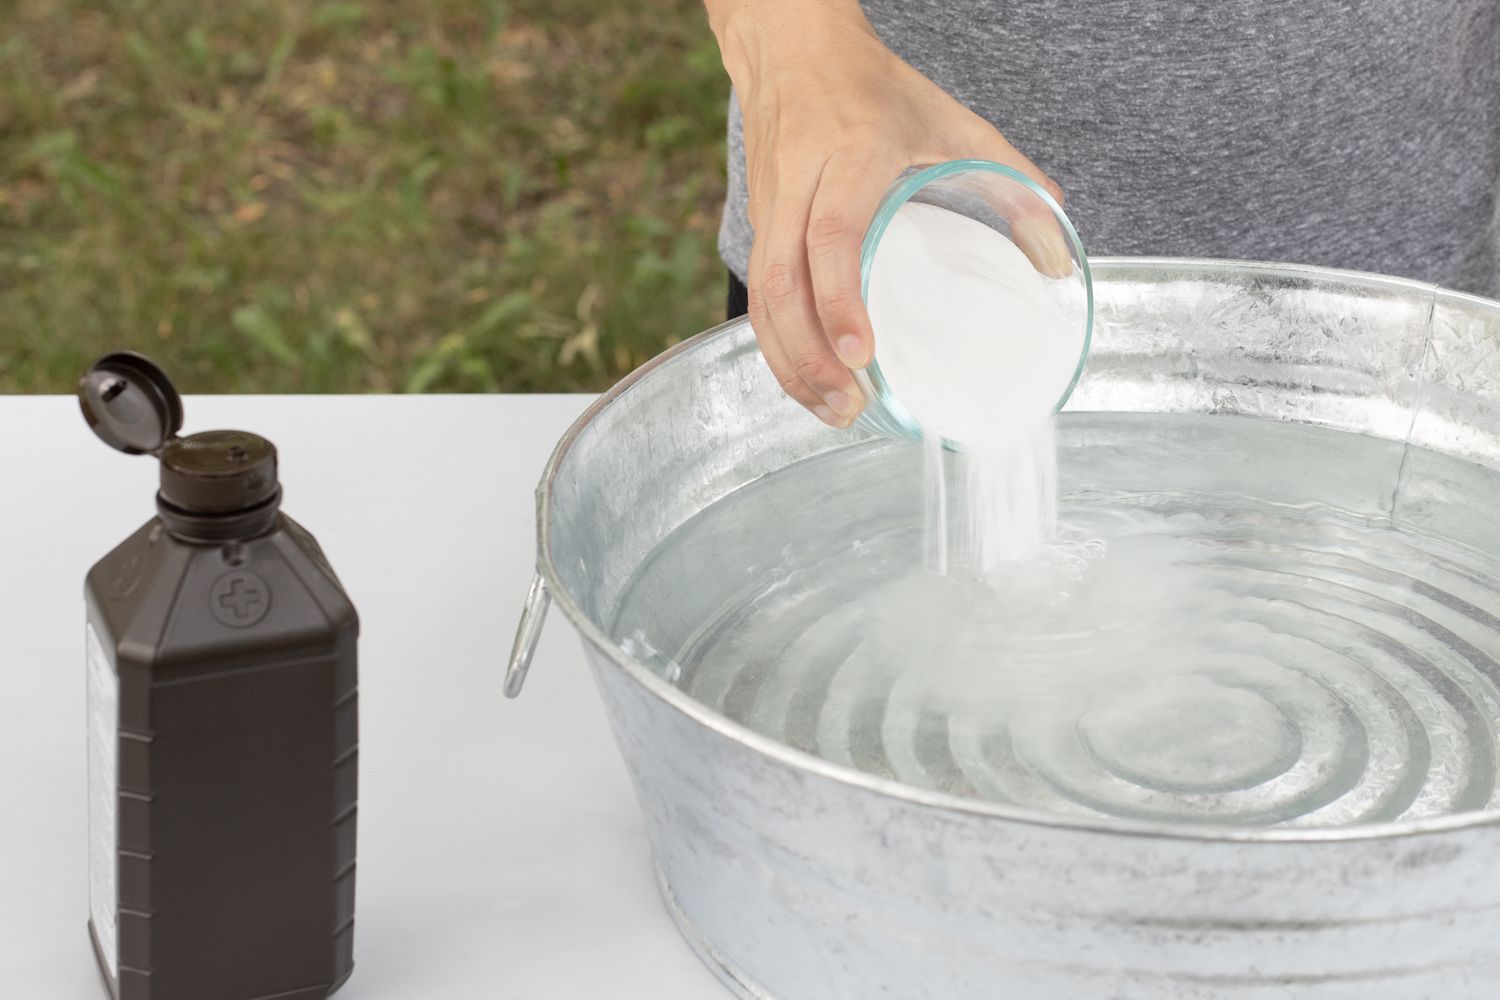 What happens if you mix hydrogen peroxide and baking soda?